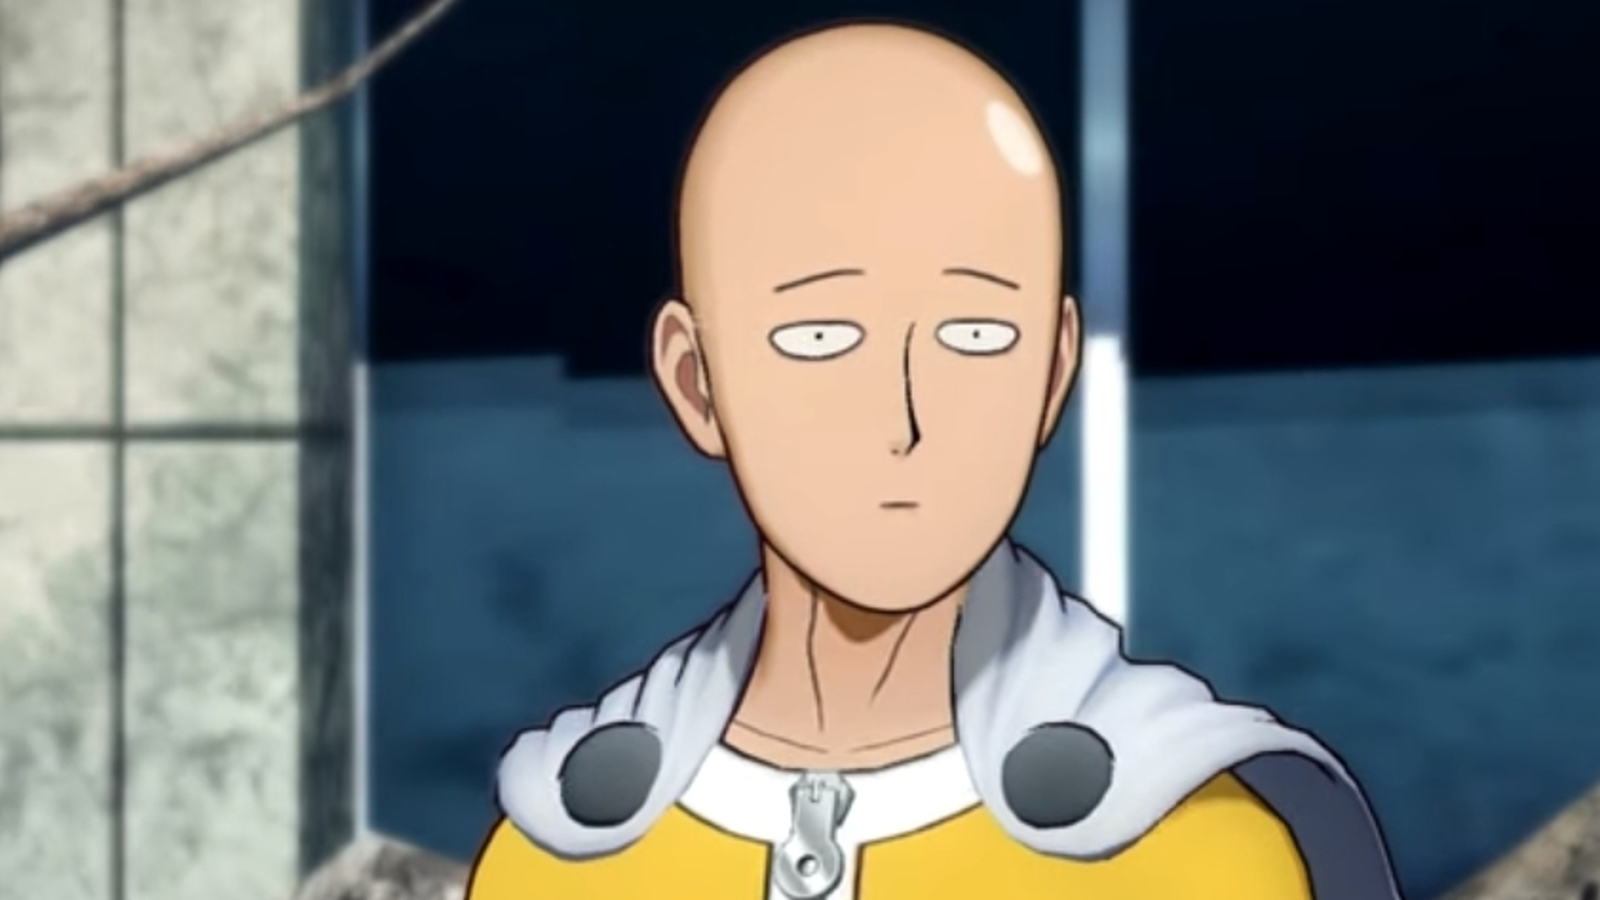 Anime Review: One-Punch Man - The Gateway